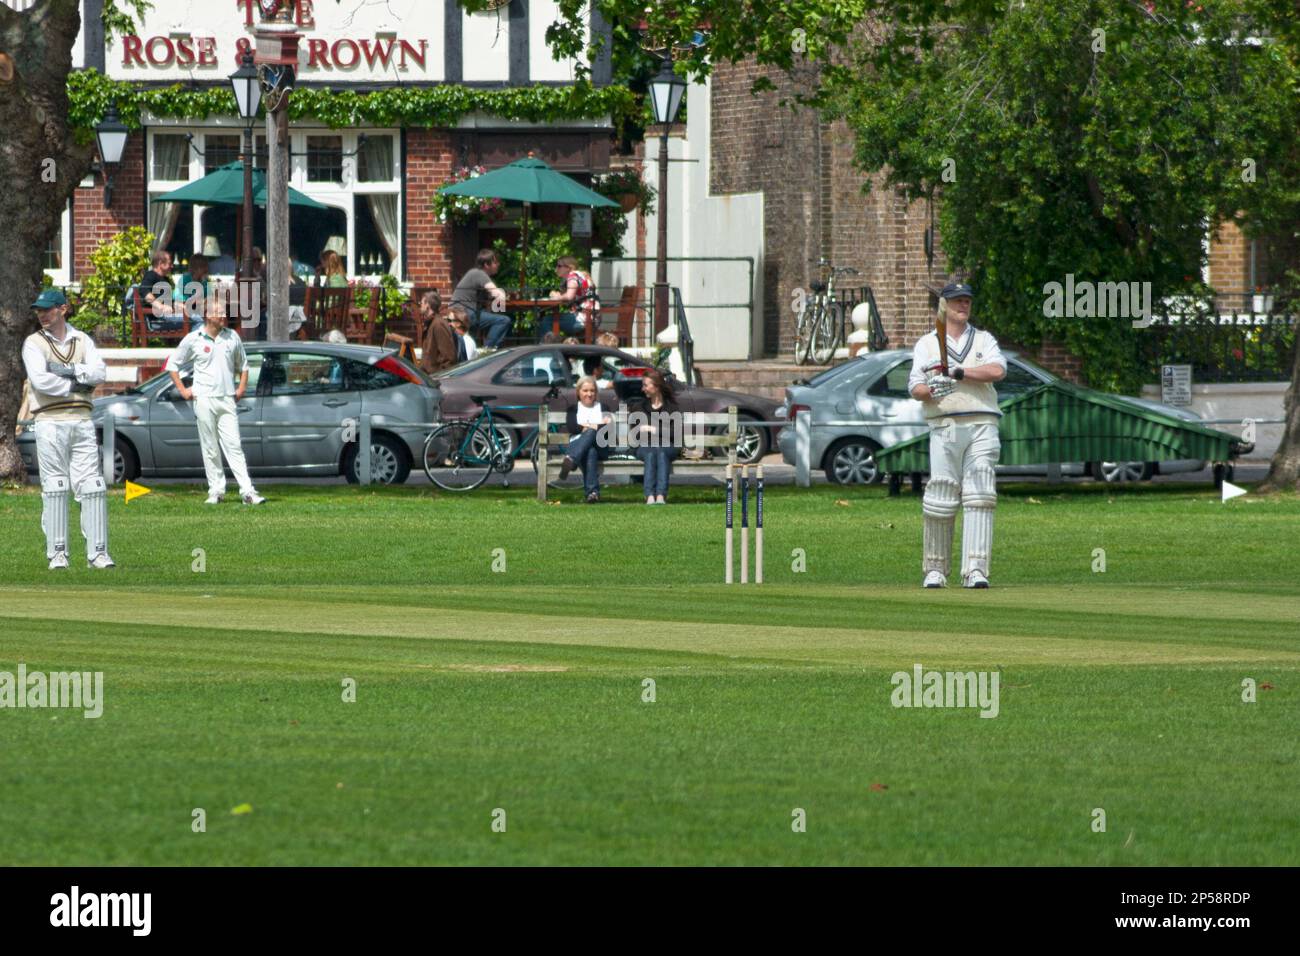 Kew, England - May 19 2007: Friendly match of cricket on Saturday morning on the field opposite of the pub “The Rose & Crown” in Kew, near London. Stock Photo